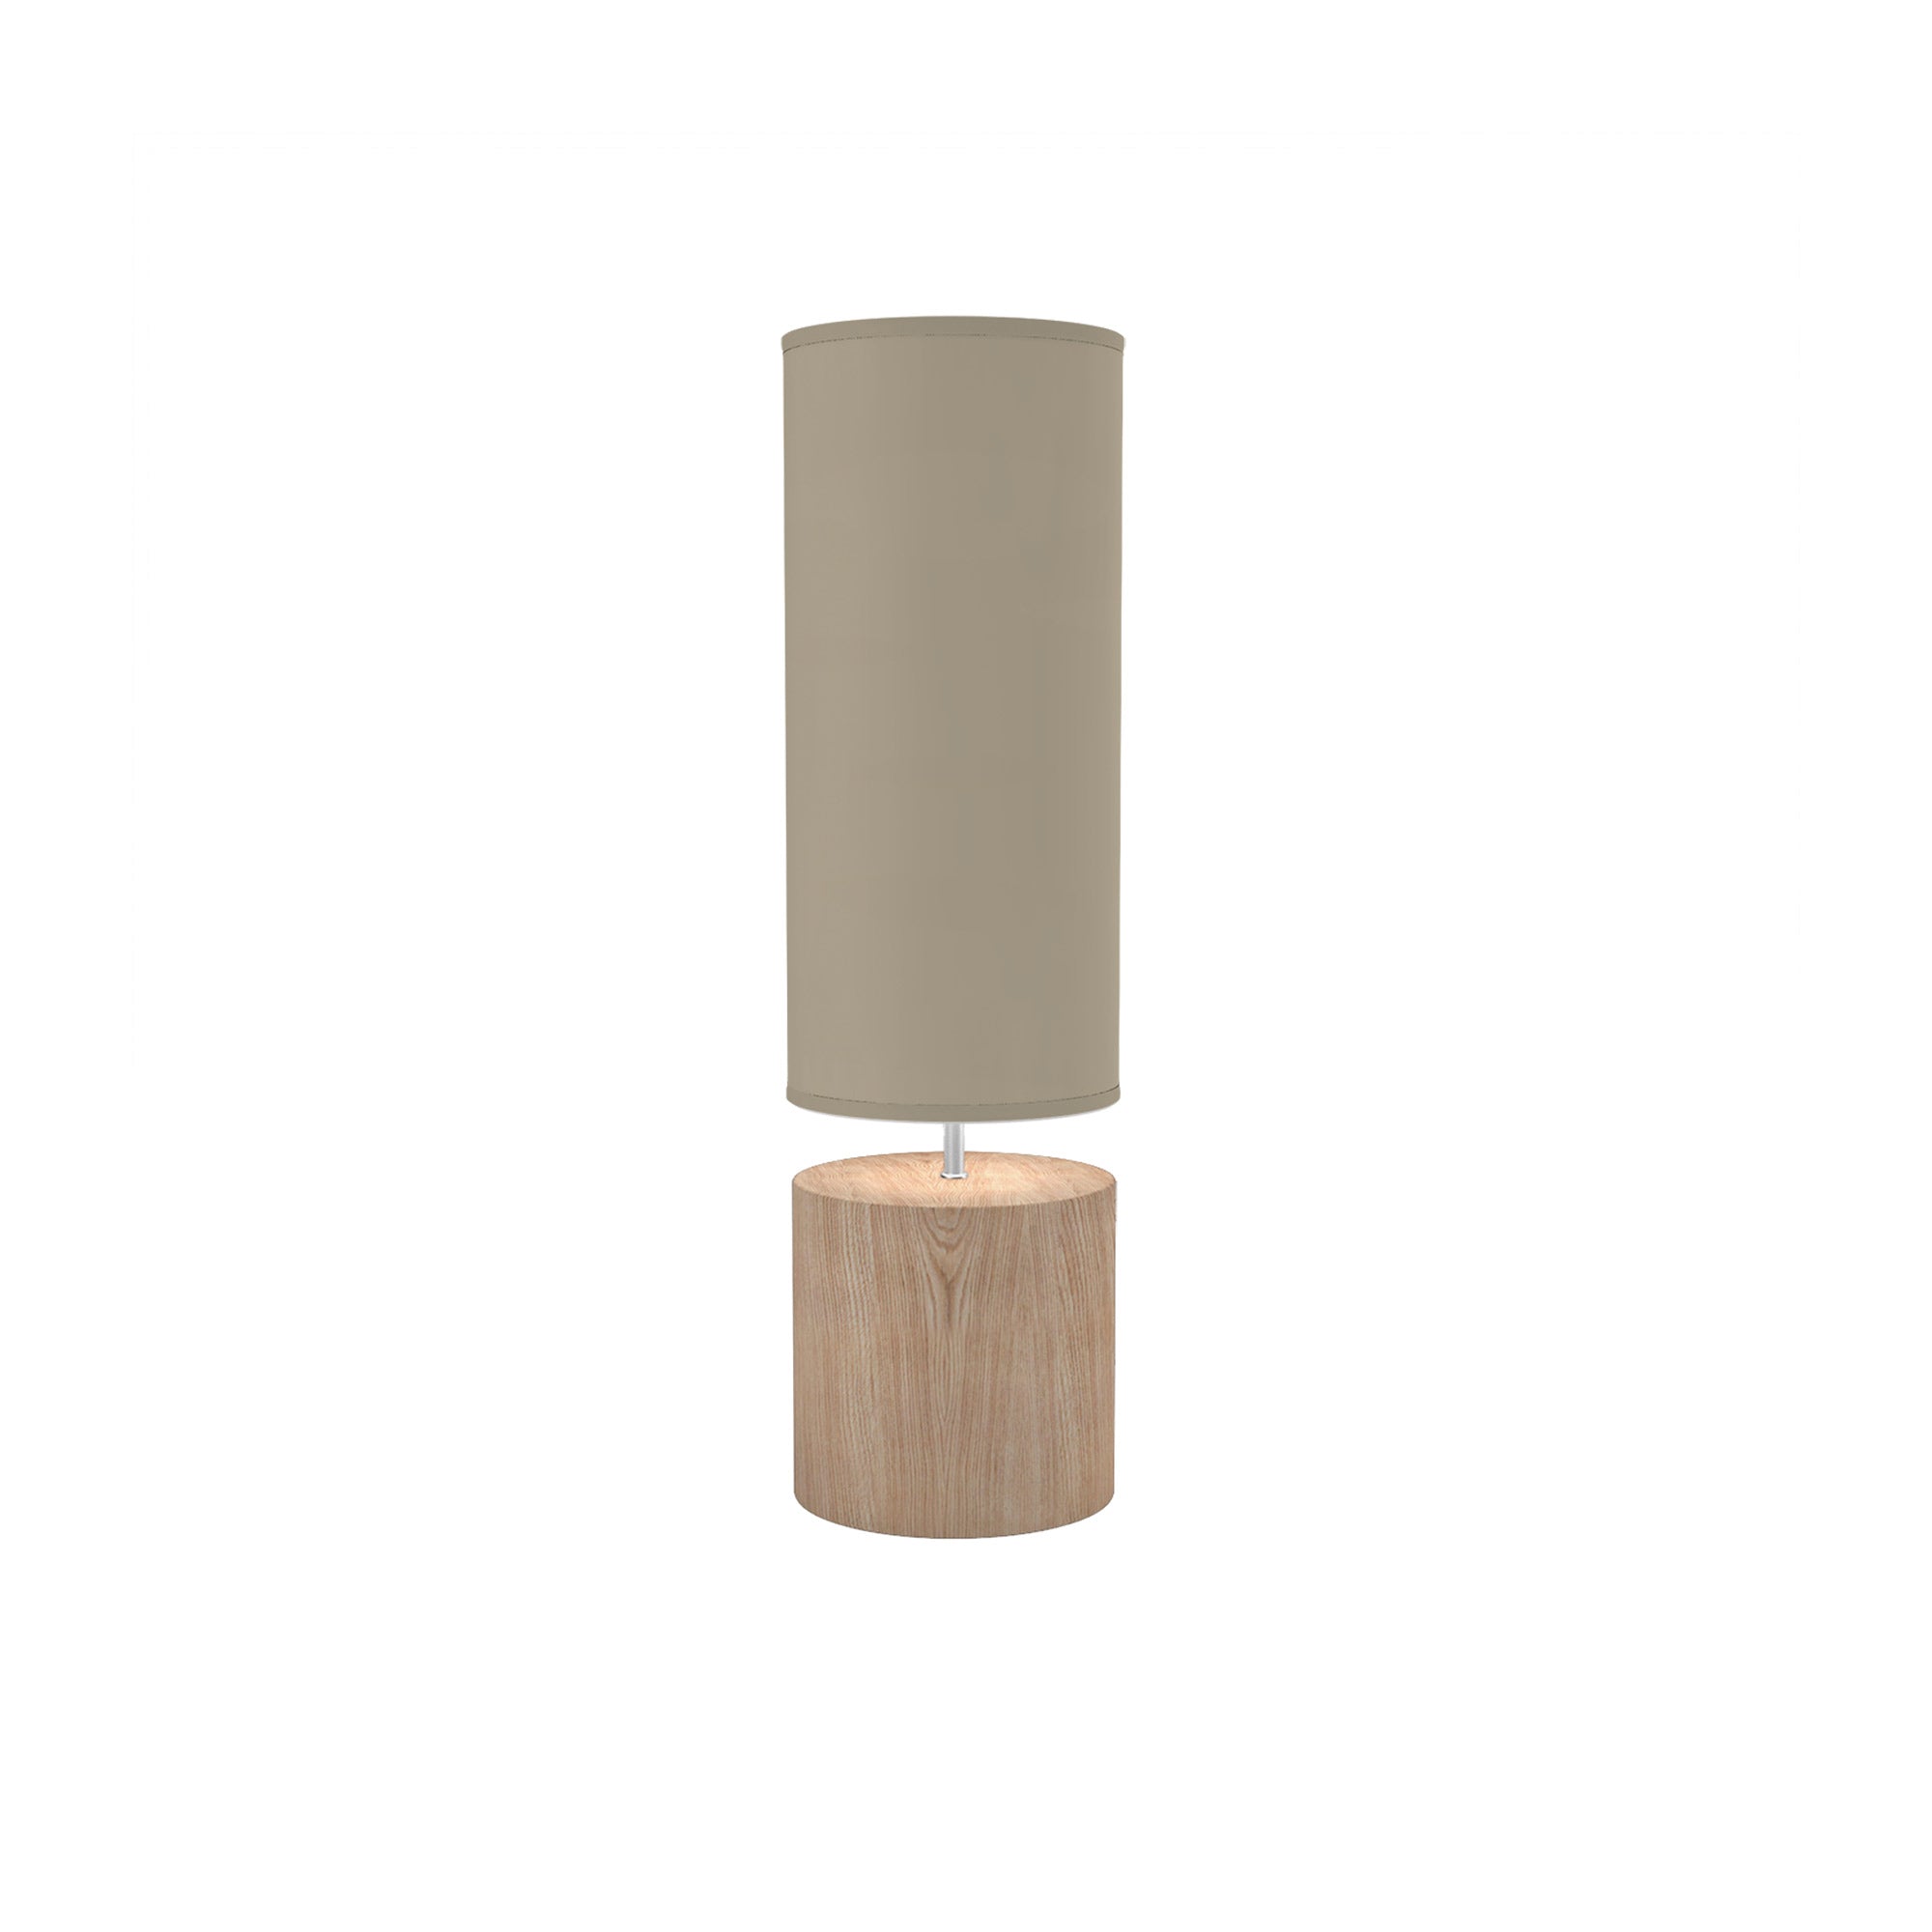 The Laurie Table Lamp from Seascape Fixtures with the natural base with linen shade in tan color.